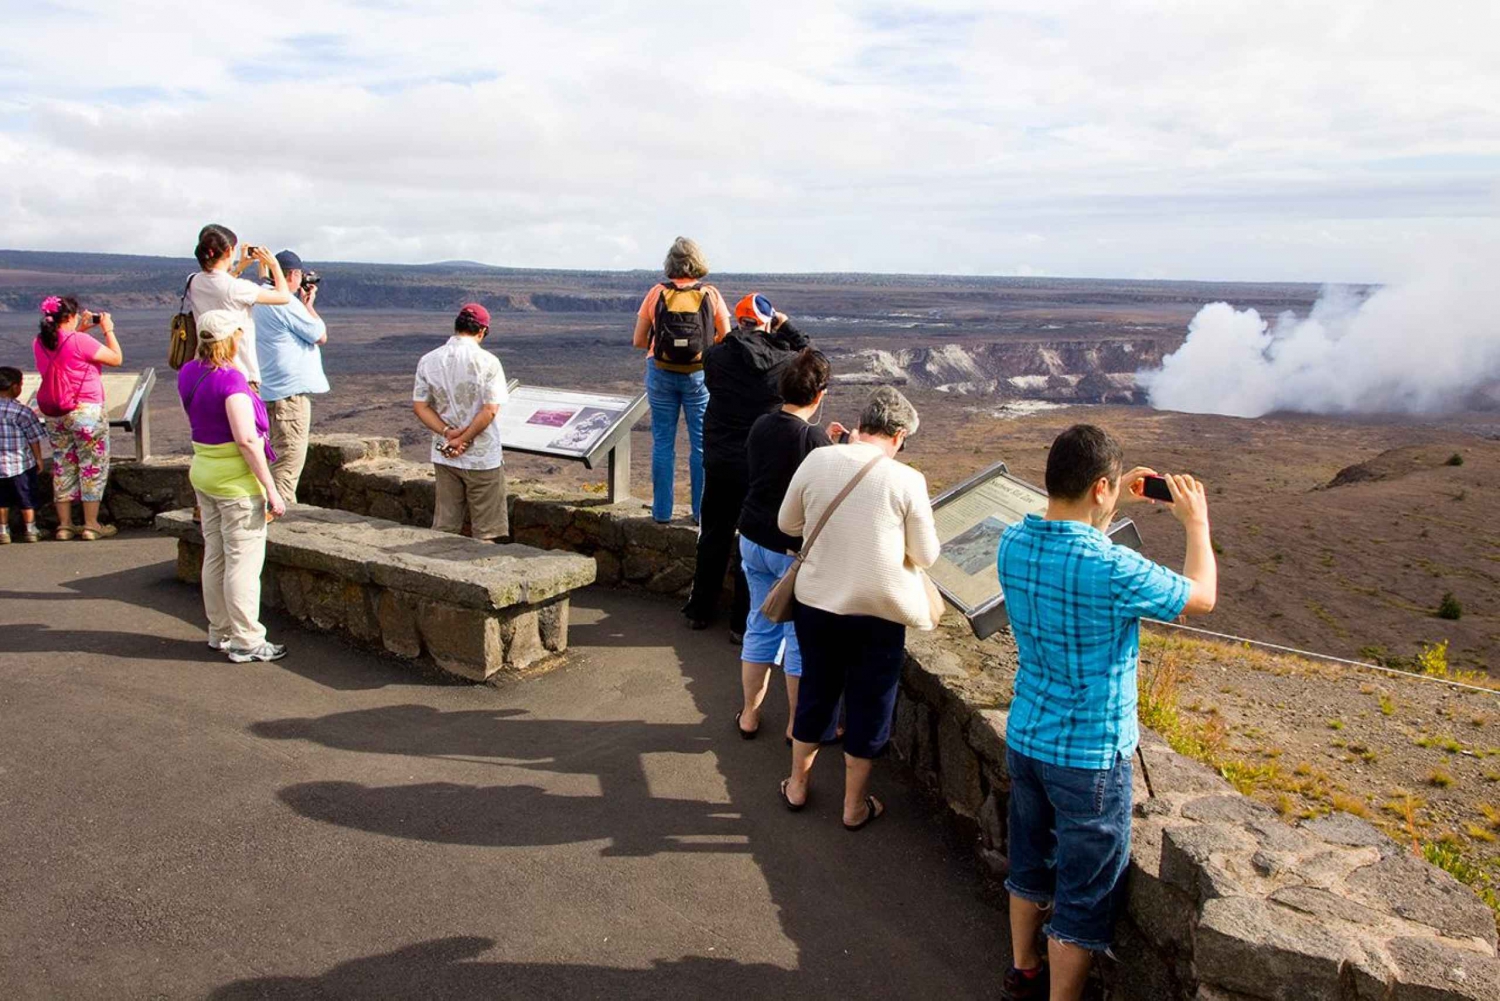 From Big island-Volcanoes & waterfall tour in a small group